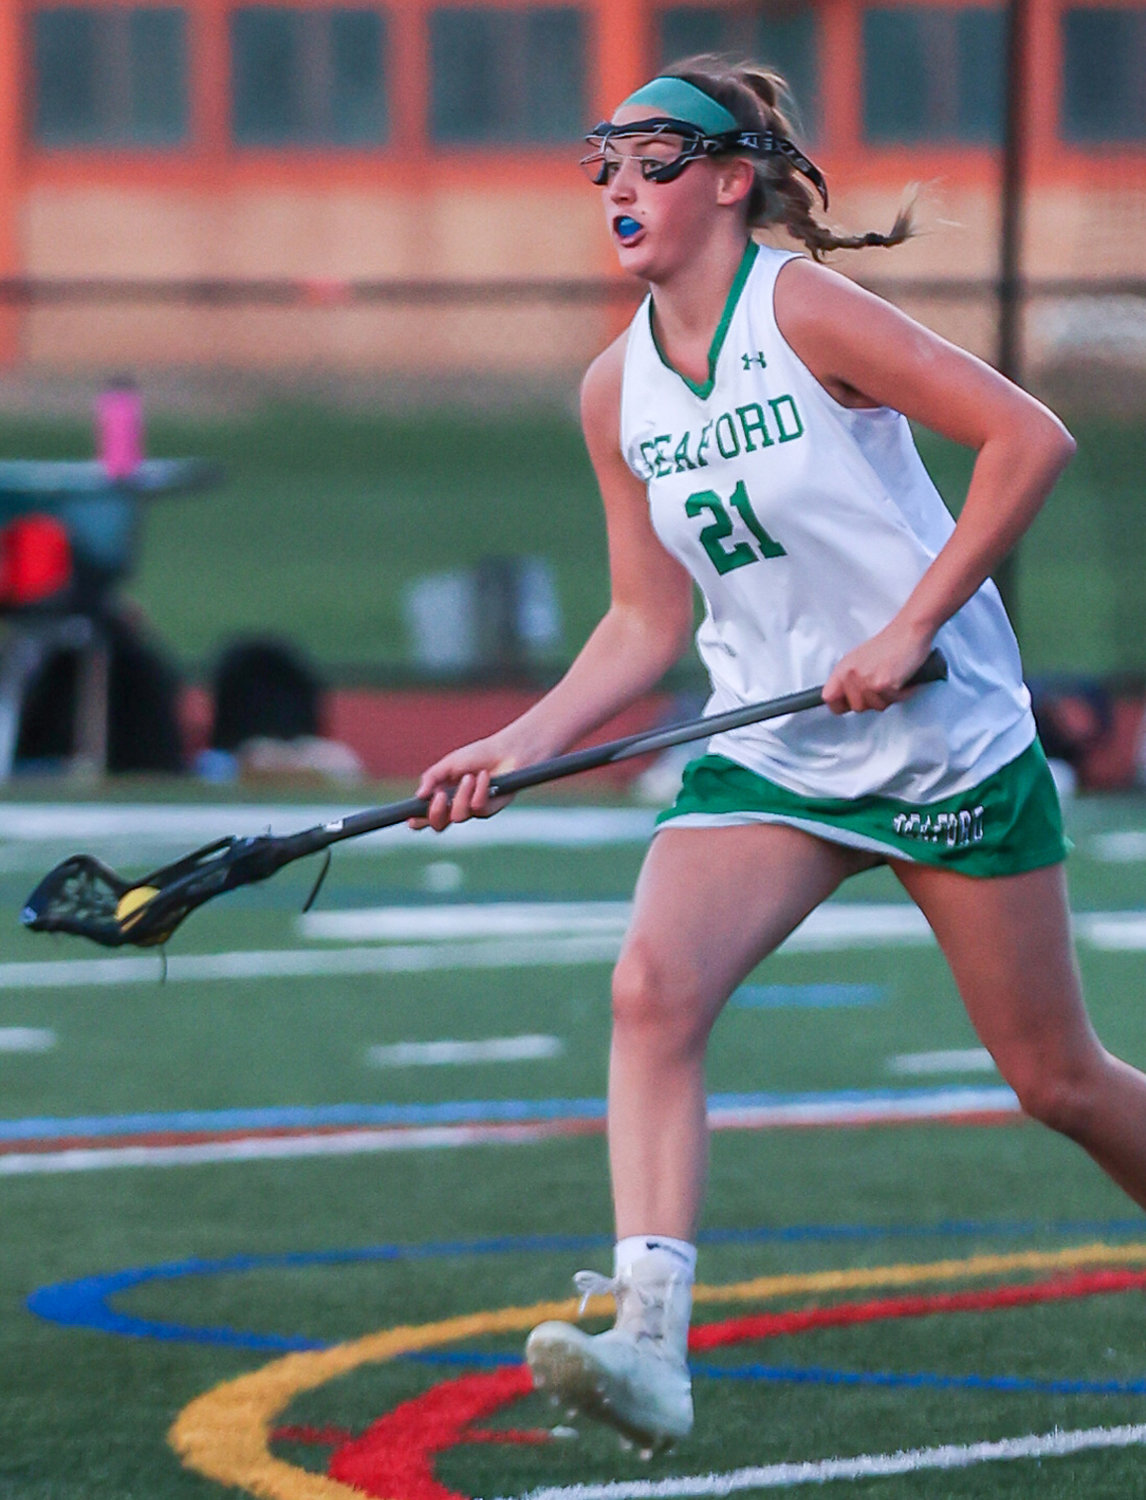 Freshman midfielder Jess Grzelaczyk had four goals and two assists in Seaford’s first-round playoff victory over Division.